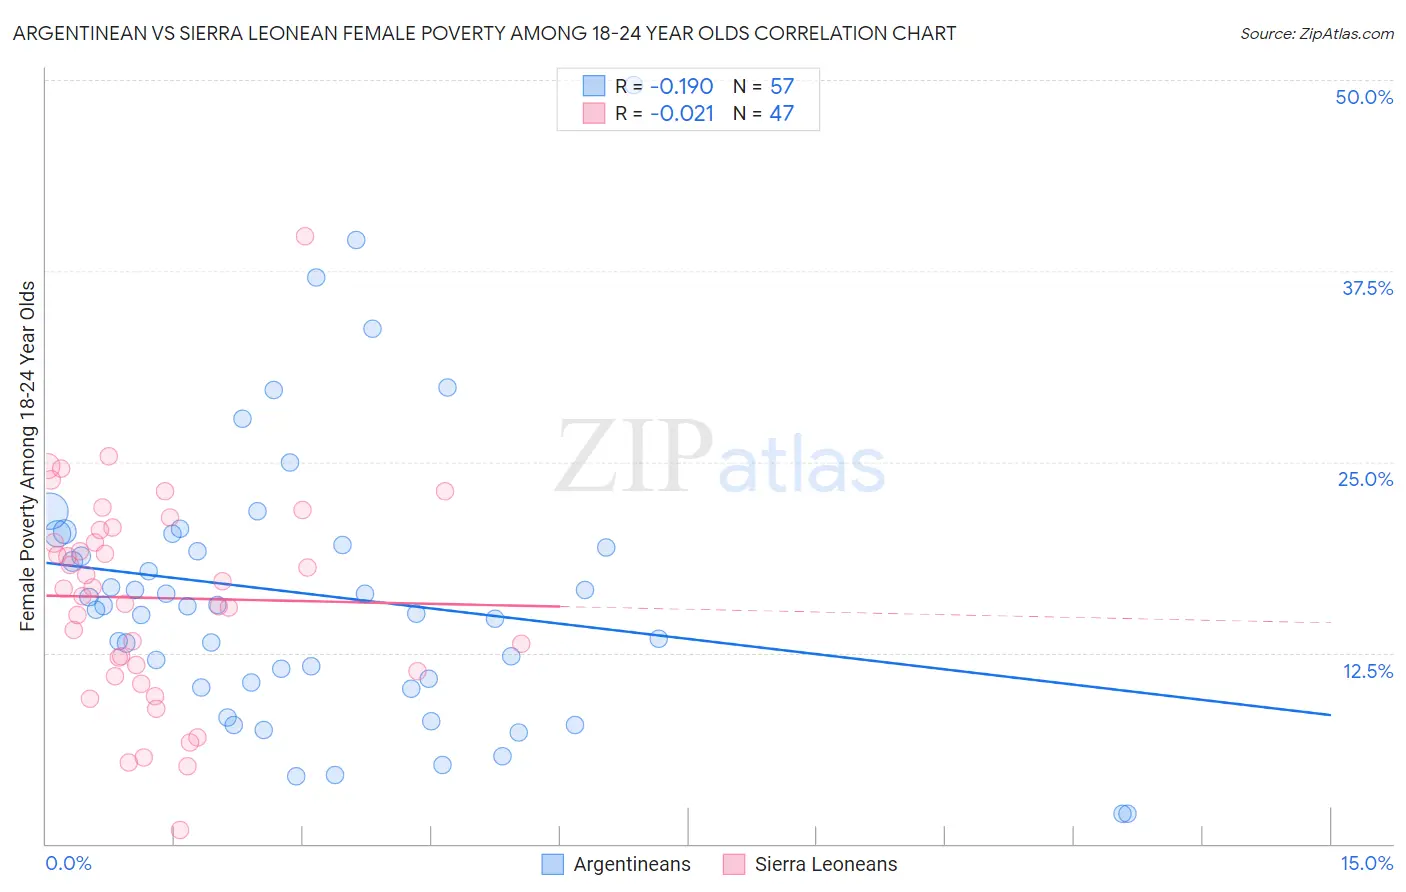 Argentinean vs Sierra Leonean Female Poverty Among 18-24 Year Olds